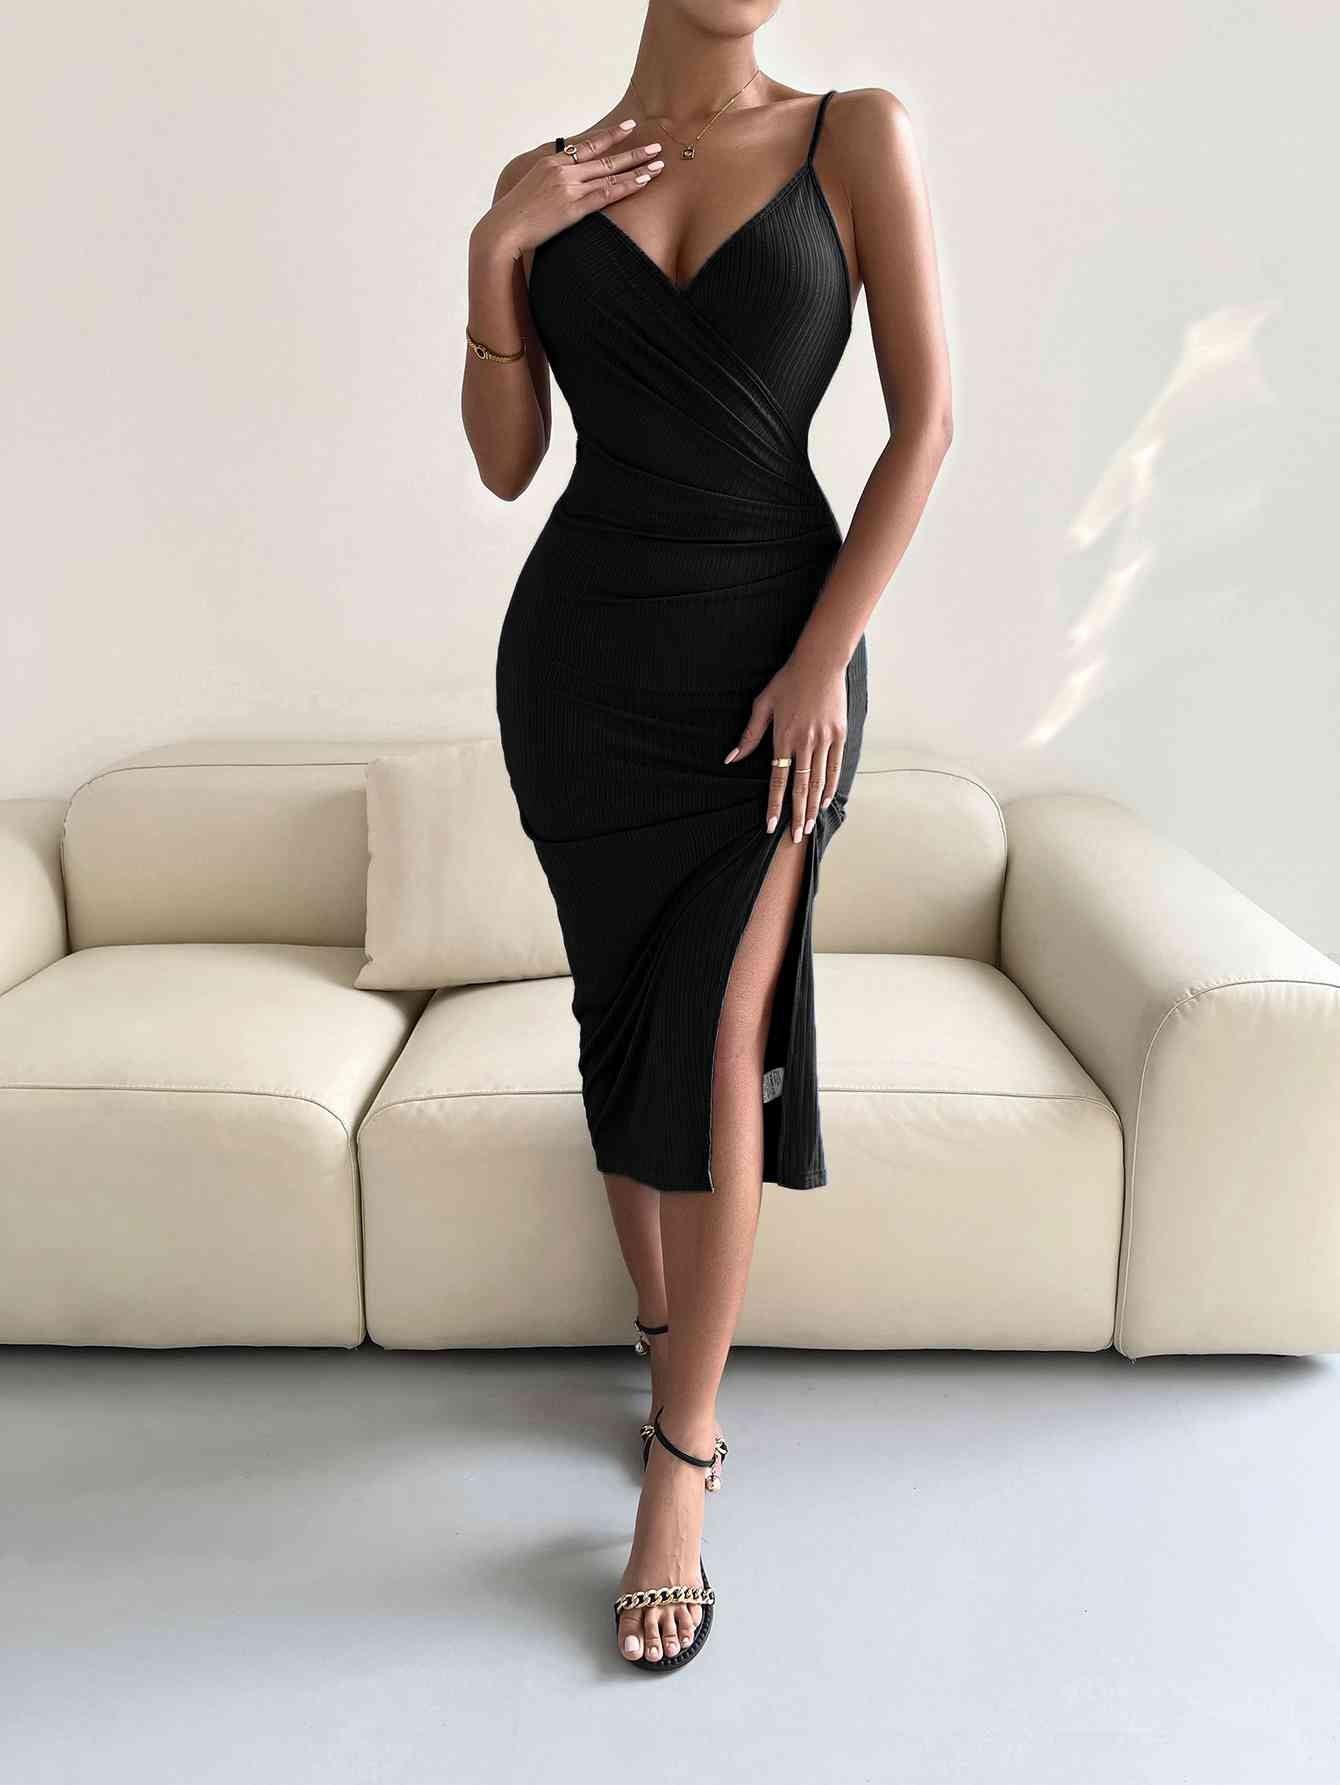 a woman in a black dress standing in front of a couch